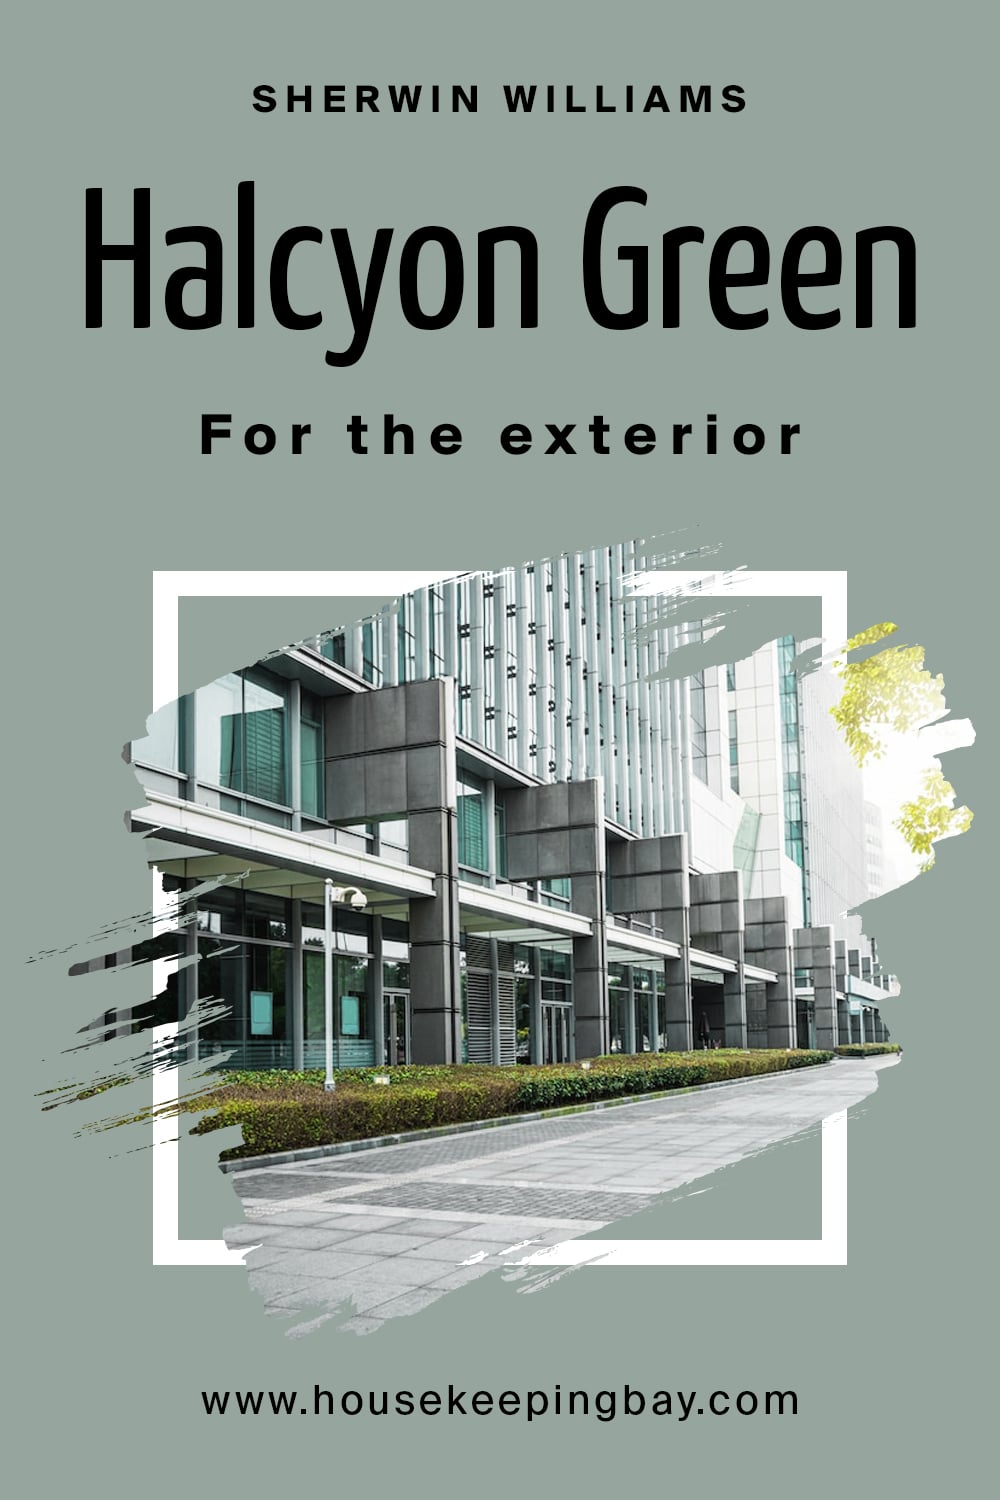 Sherwin Williams. Halcyon Green For the exterior